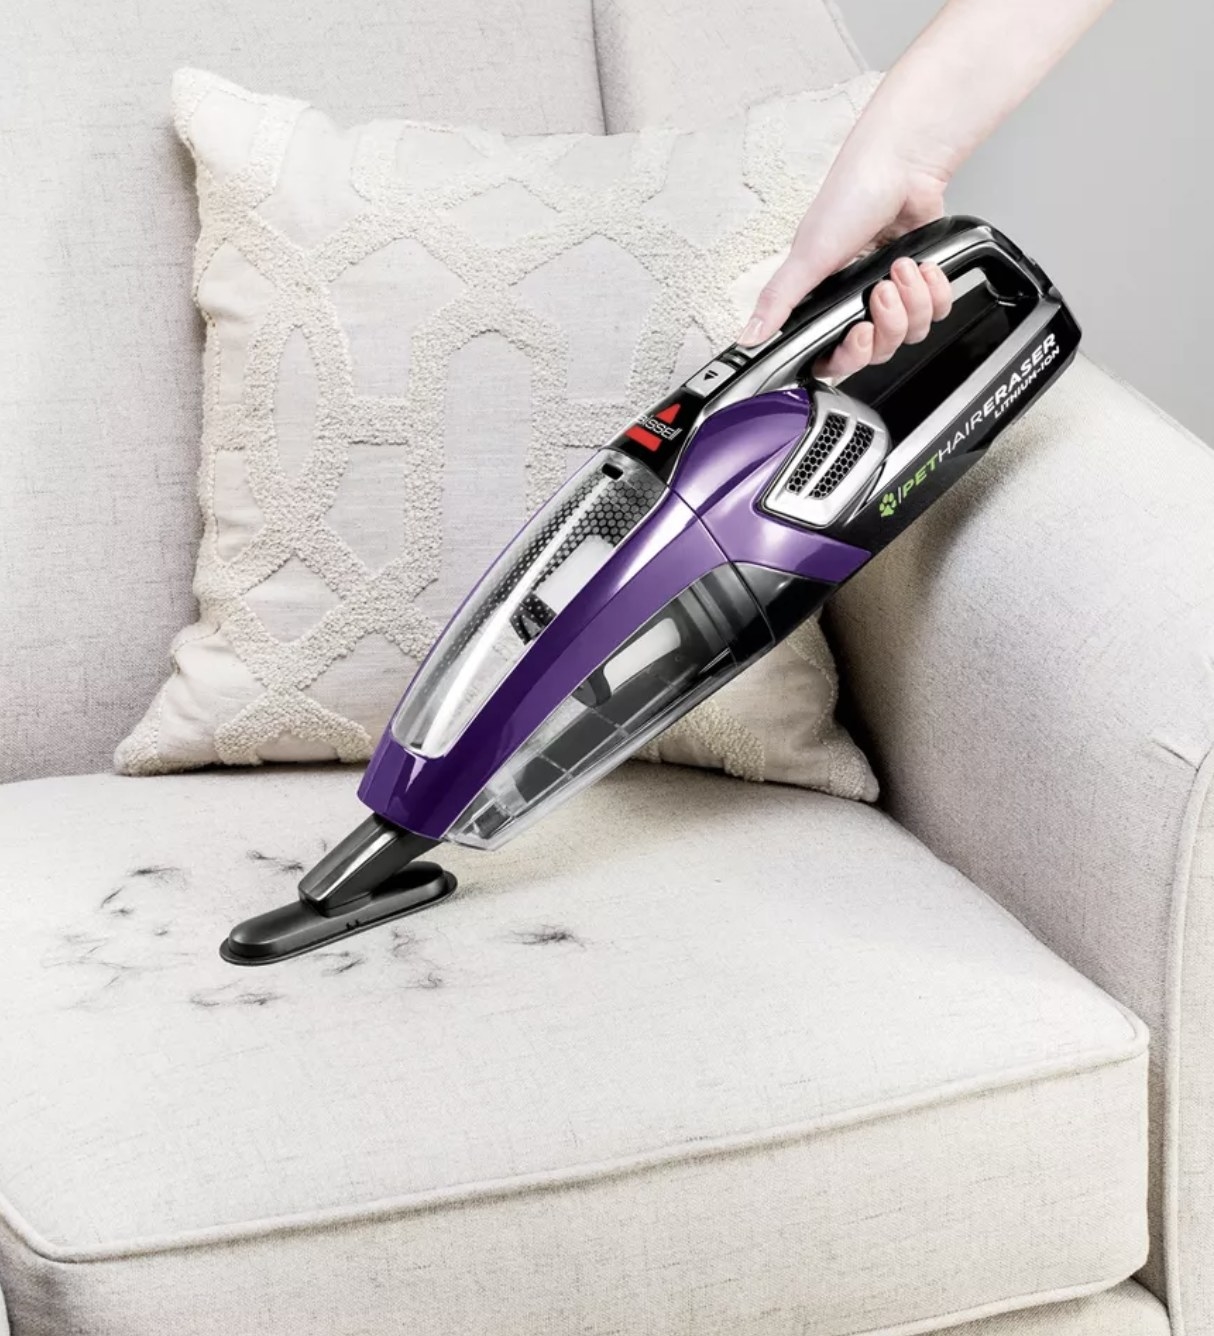 a handheld vacuum cleaning pet hair off a couch